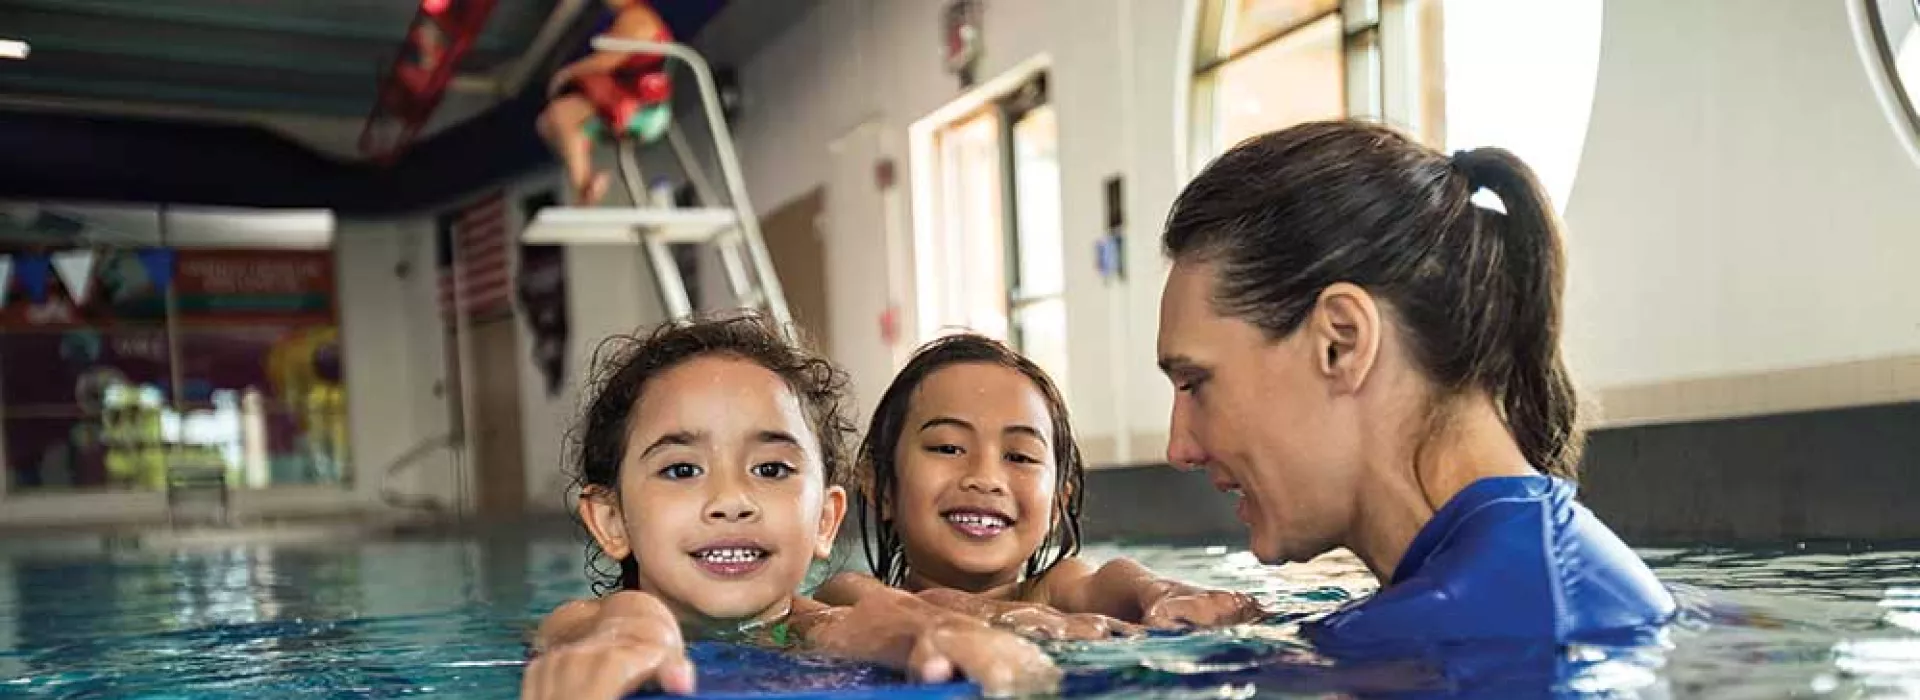 Register for YMCA Swim Lessons and Learn to Swim